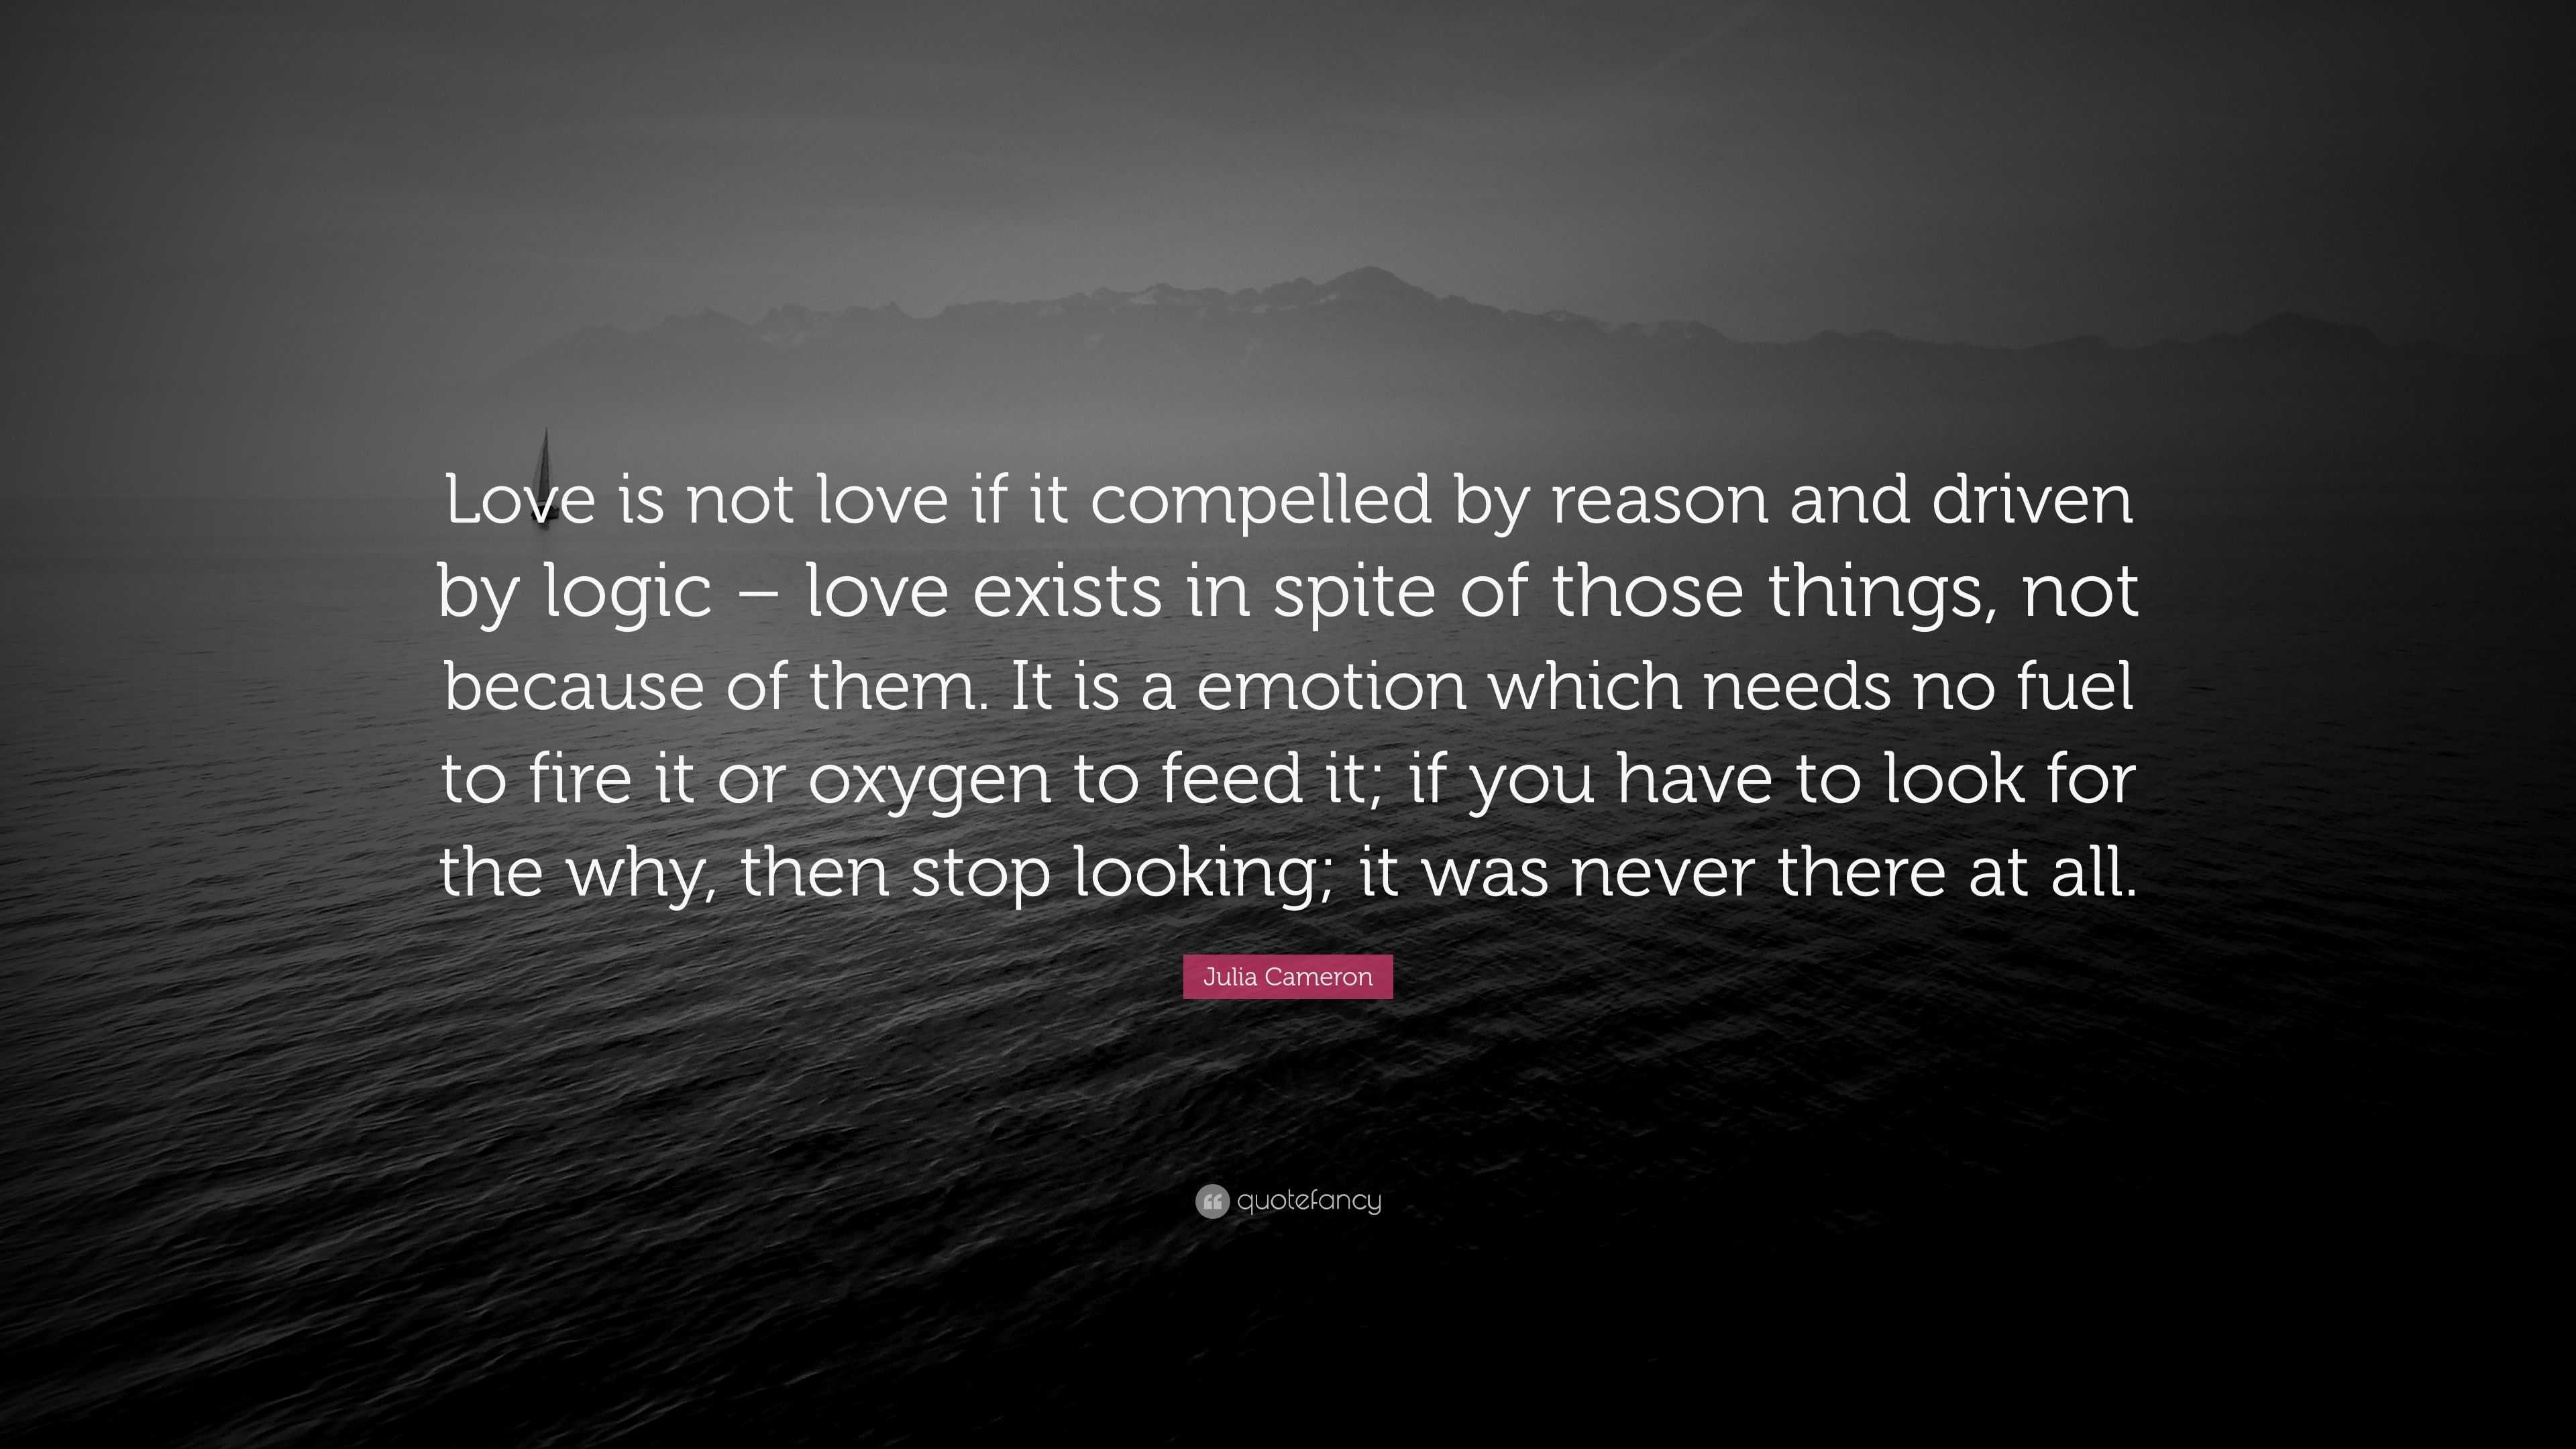 Julia Cameron Quote: “Love is not love if it compelled by reason and ...